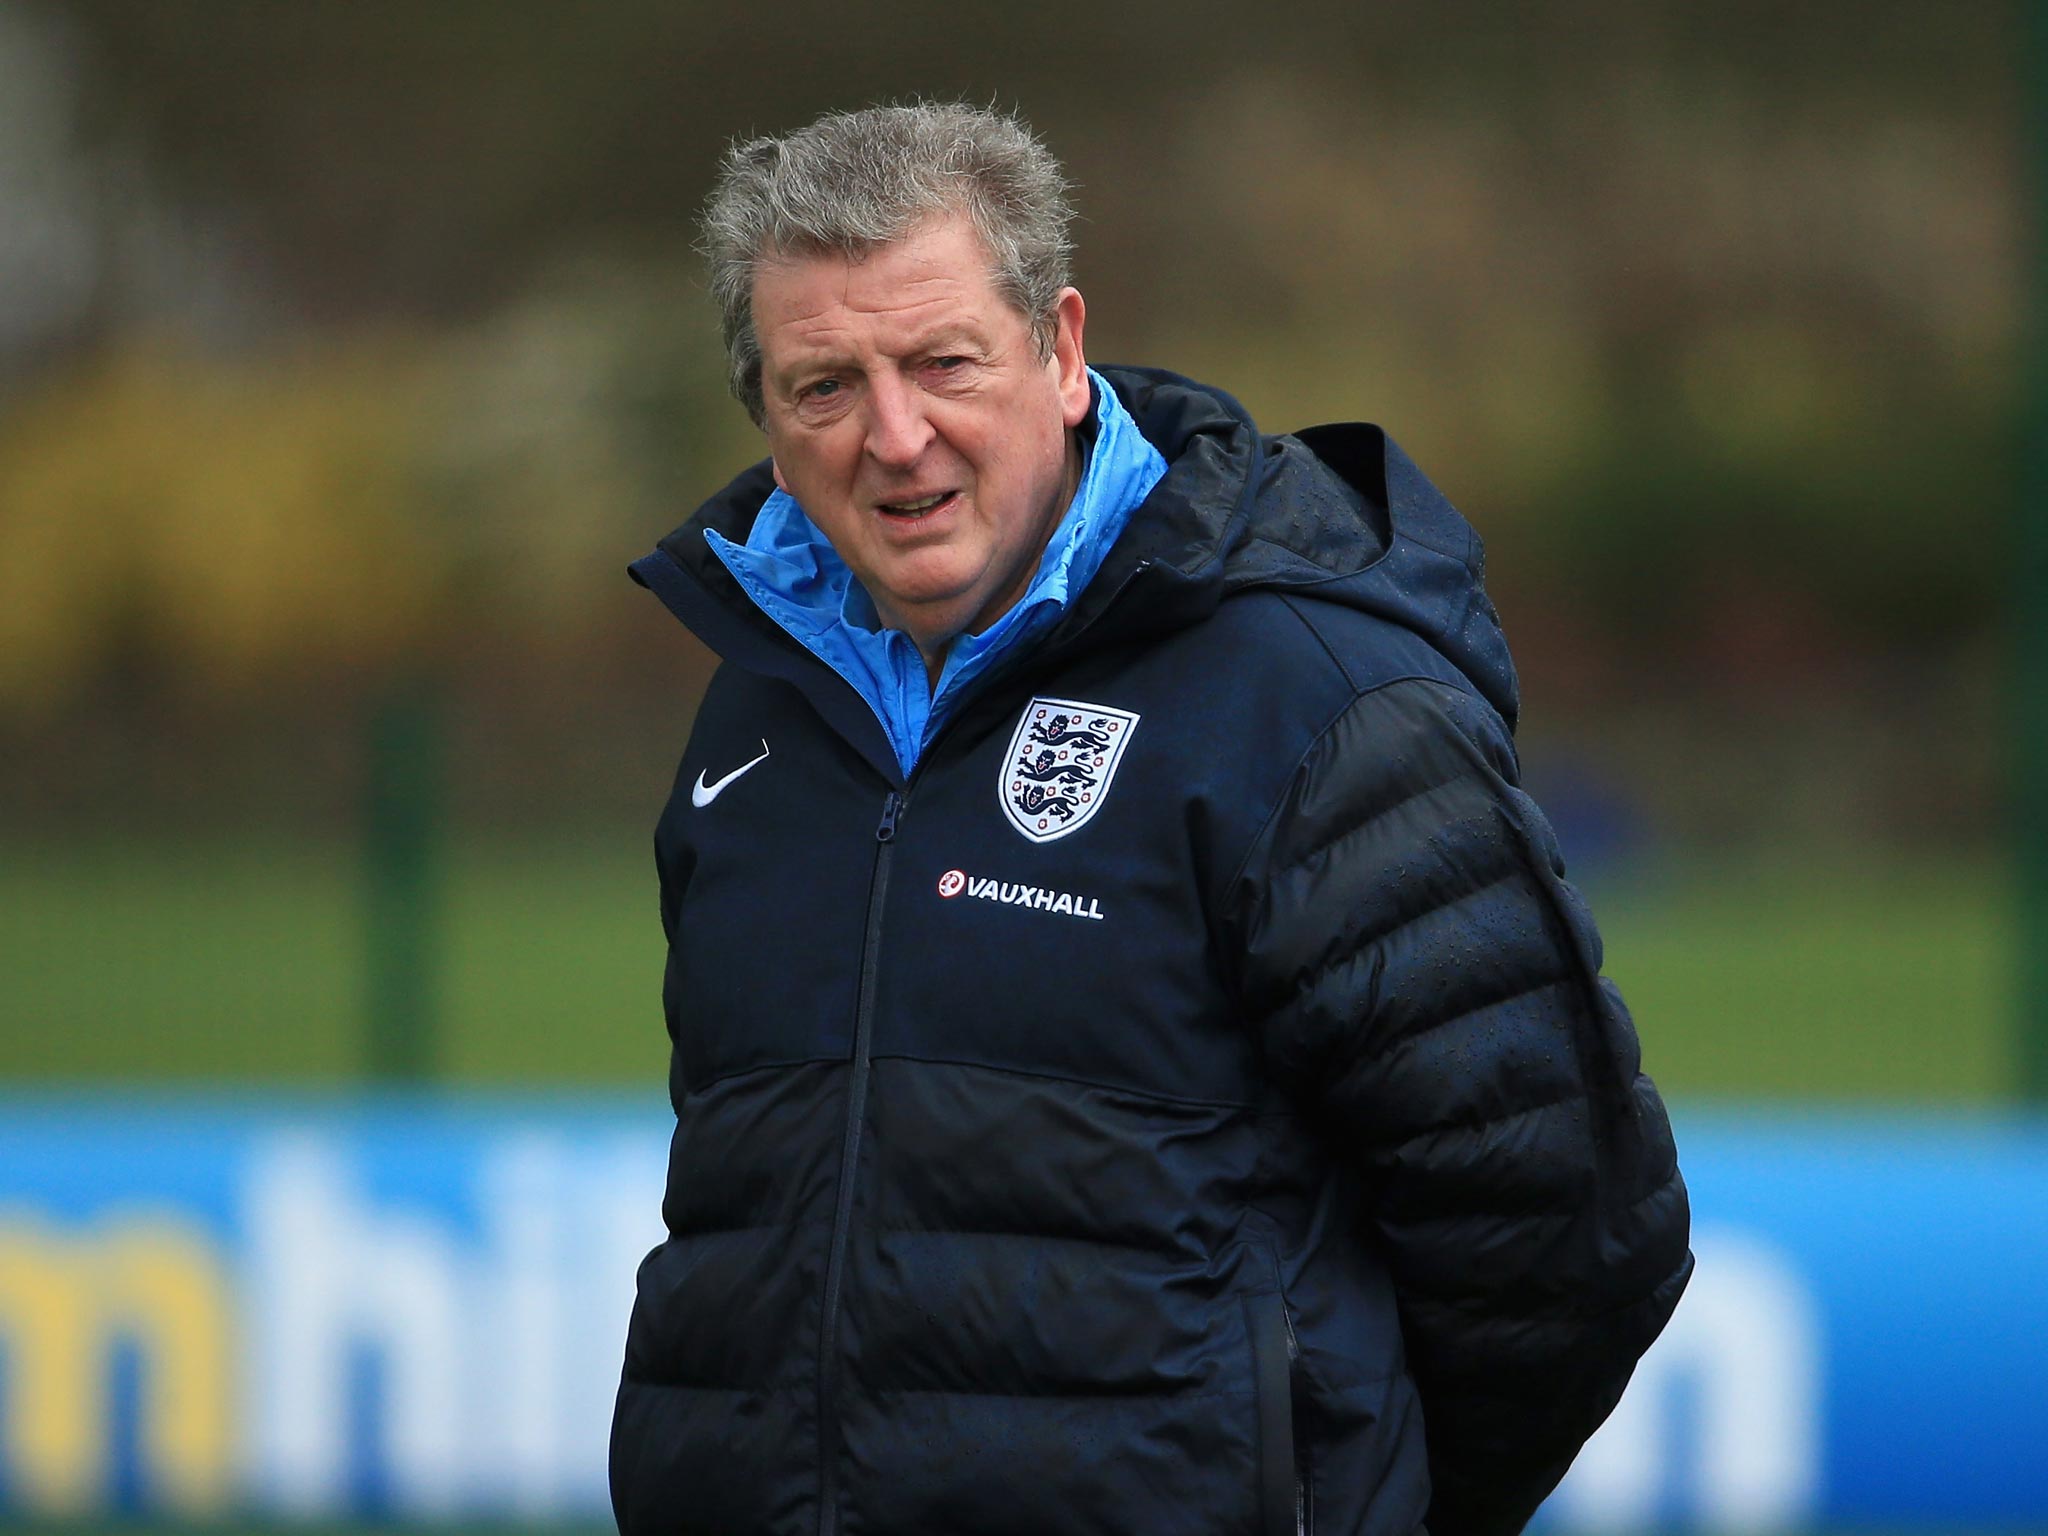 Roy Hodgson has confirmed that Dr Steven Peters will be tasked with preparing the England side for the World Cup after being named their sports psychiatrist